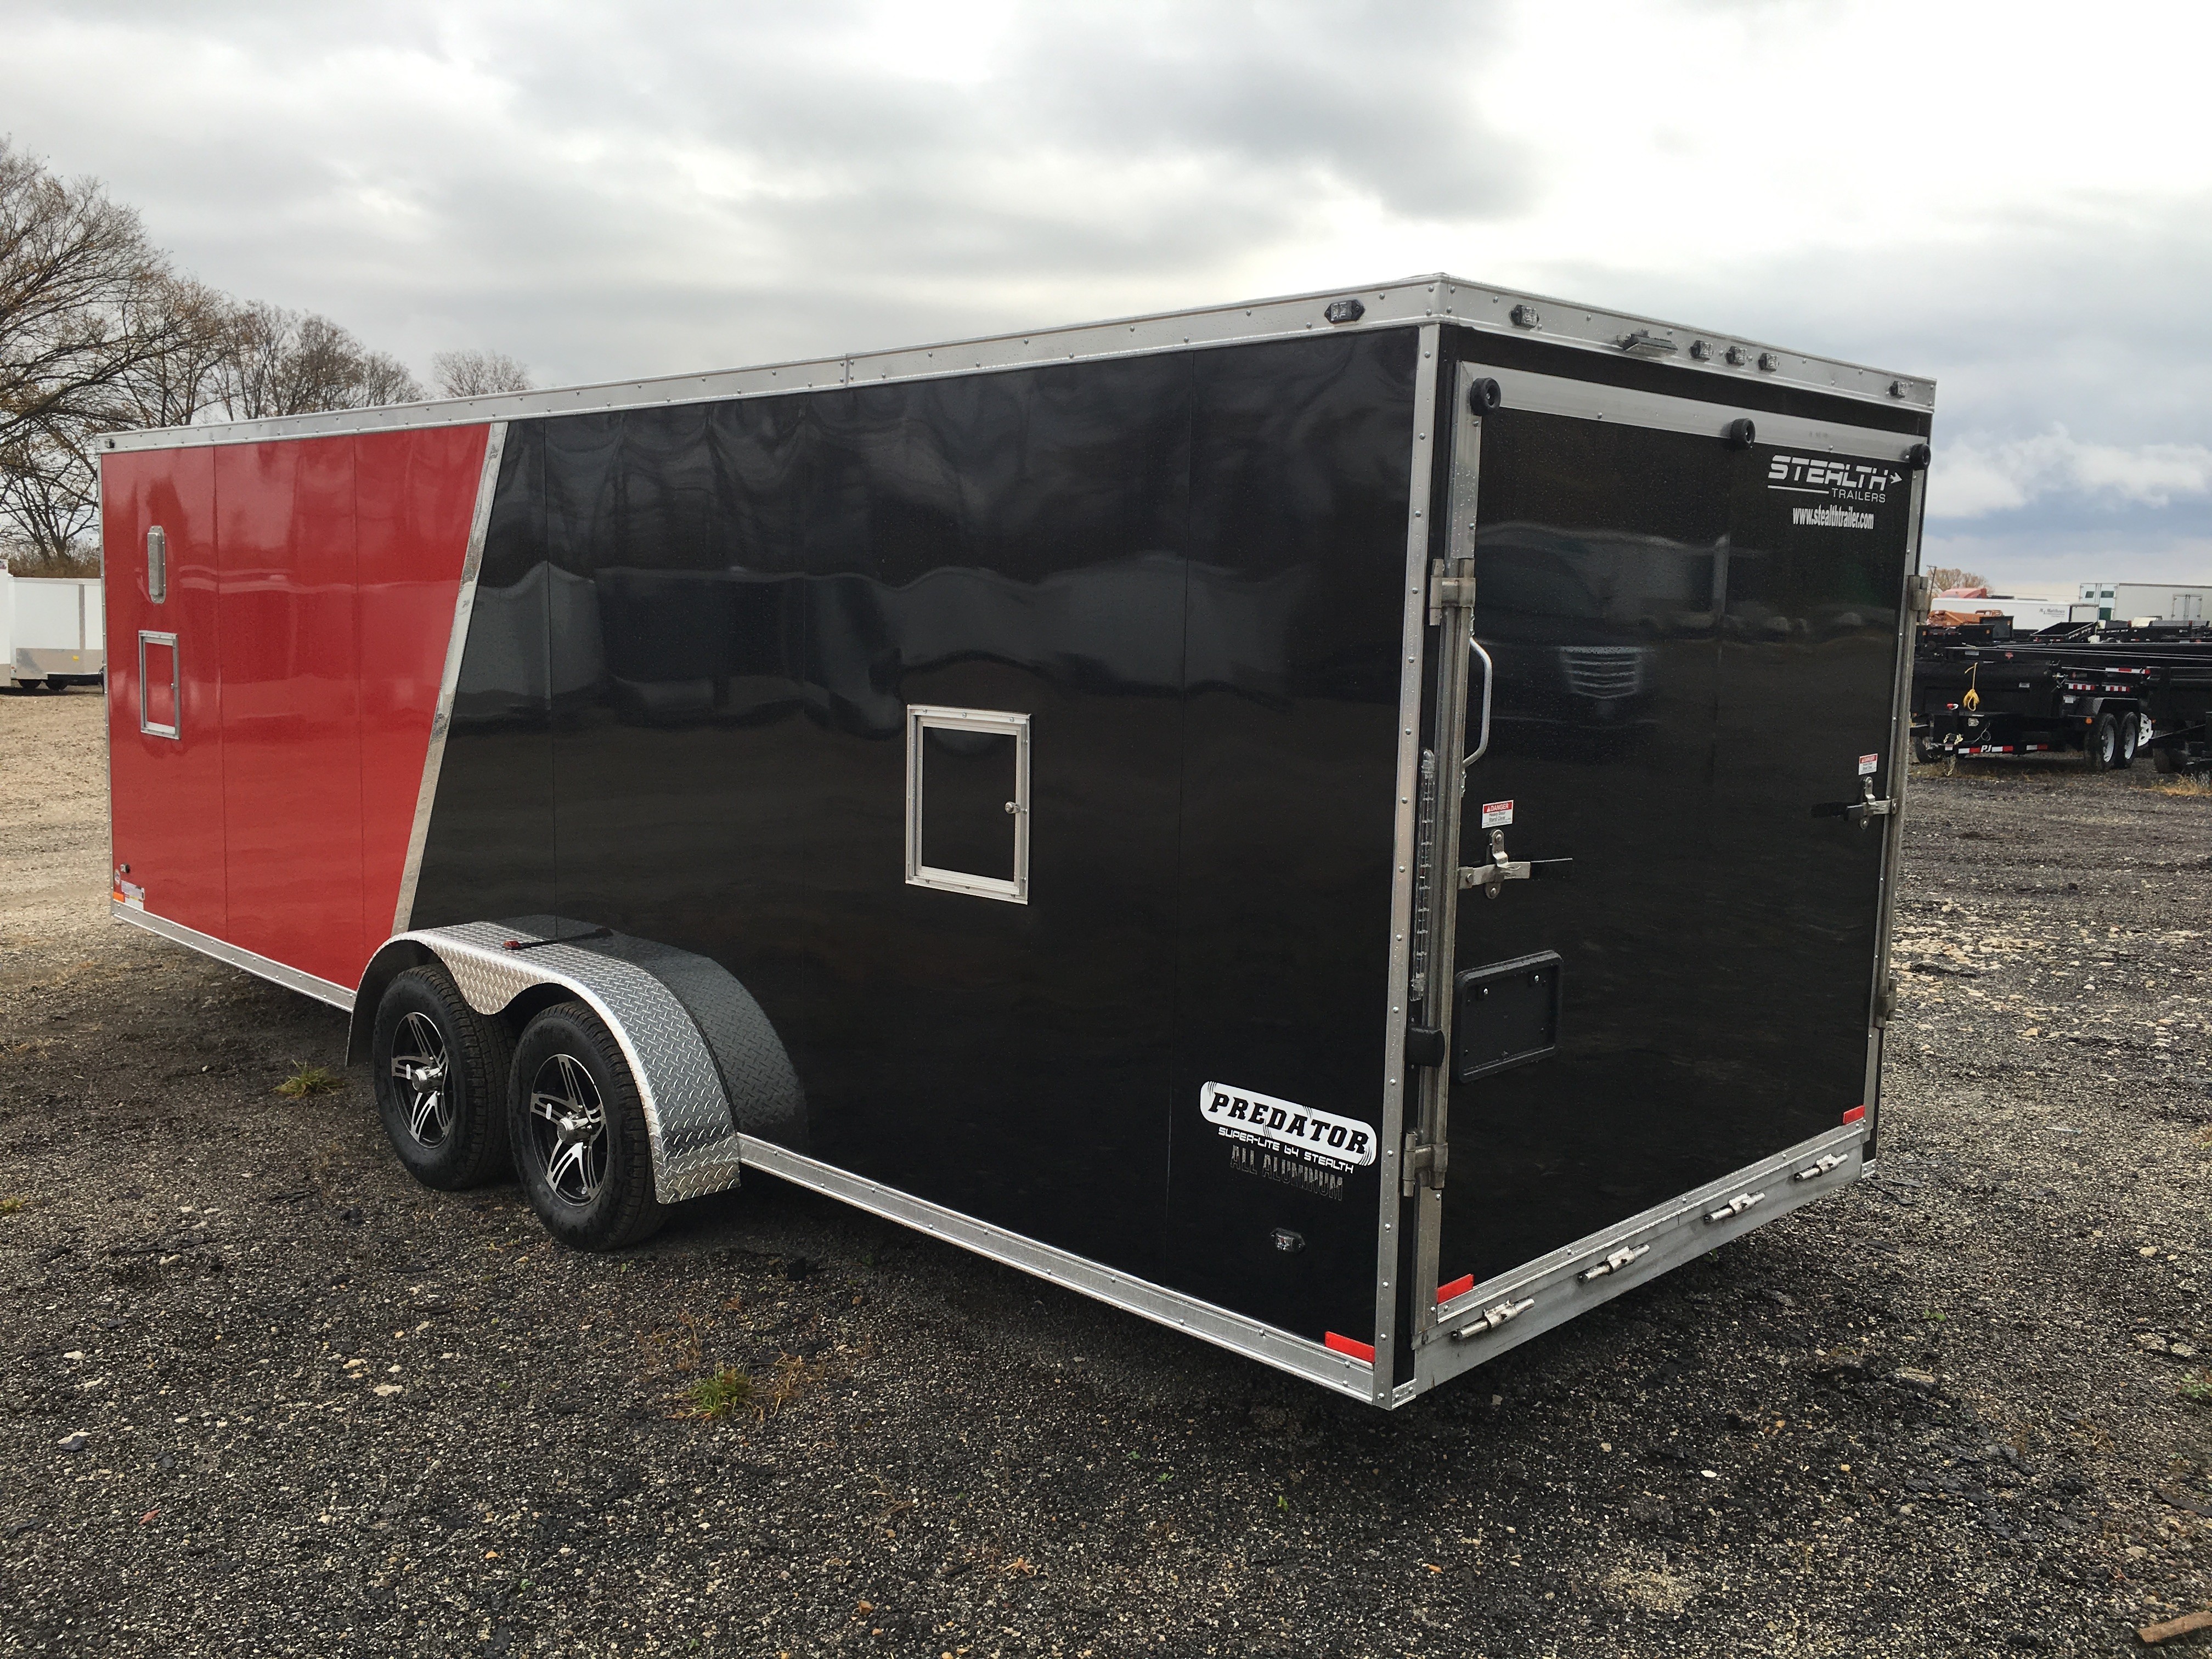 Buy & Sell New & Used Trailers STEALTH PREDATOR 7X27 at TrailerShopper